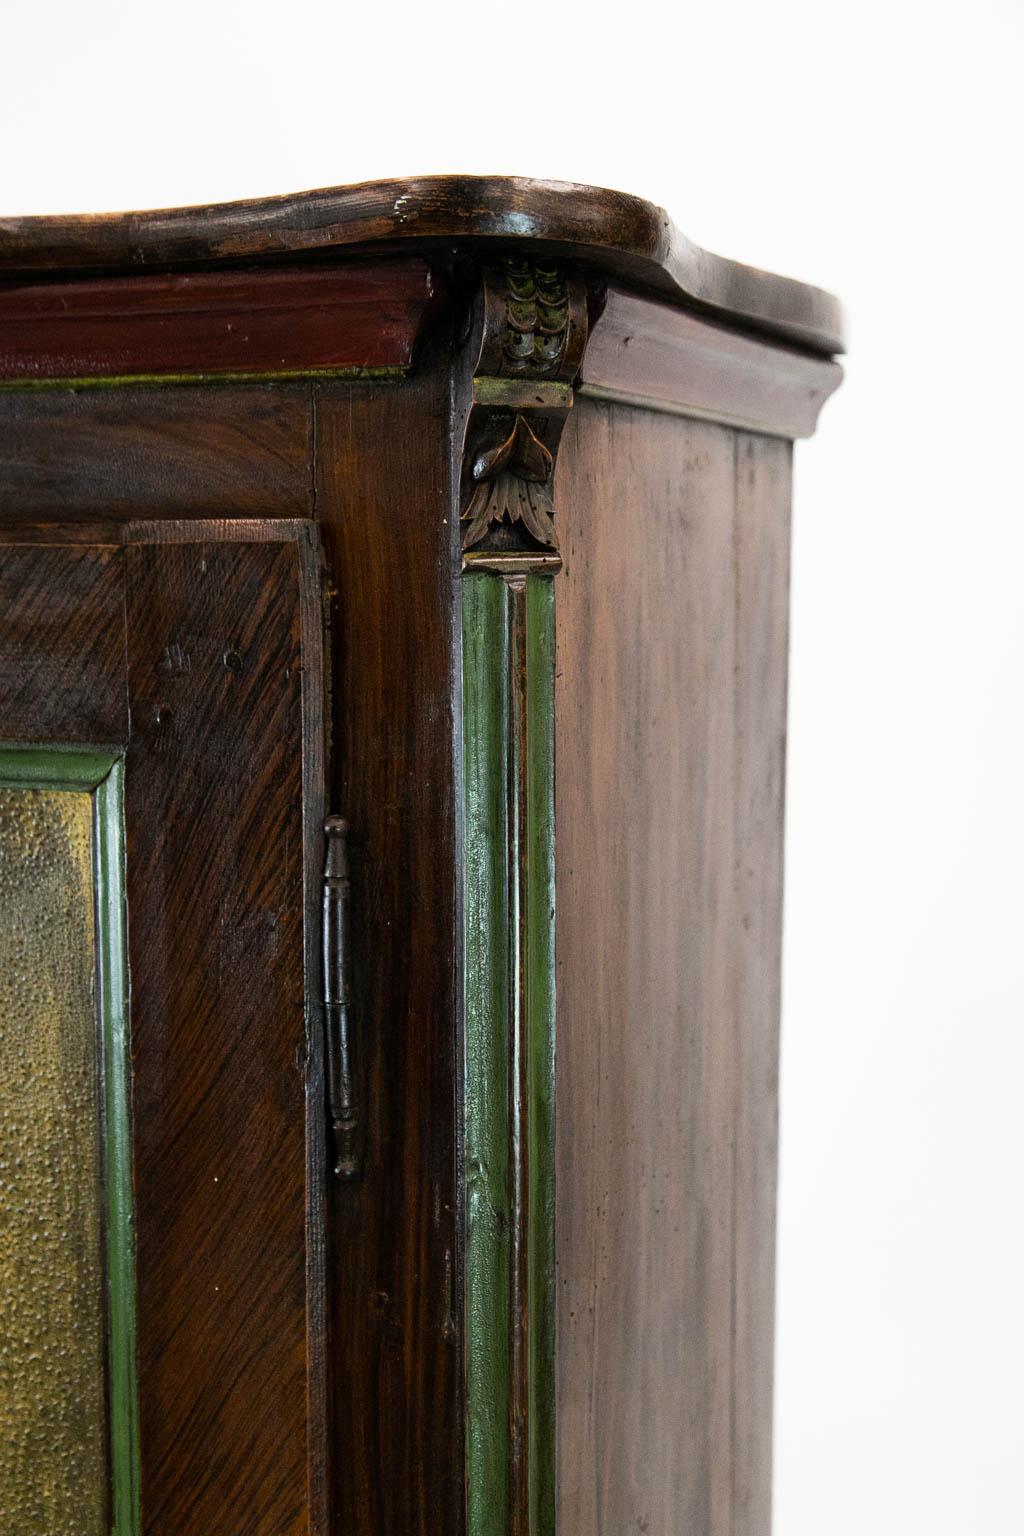 The door of this bonnetiere has fluted chamfered corners and is faux painted with herringbone banding. The shelves are fixed.